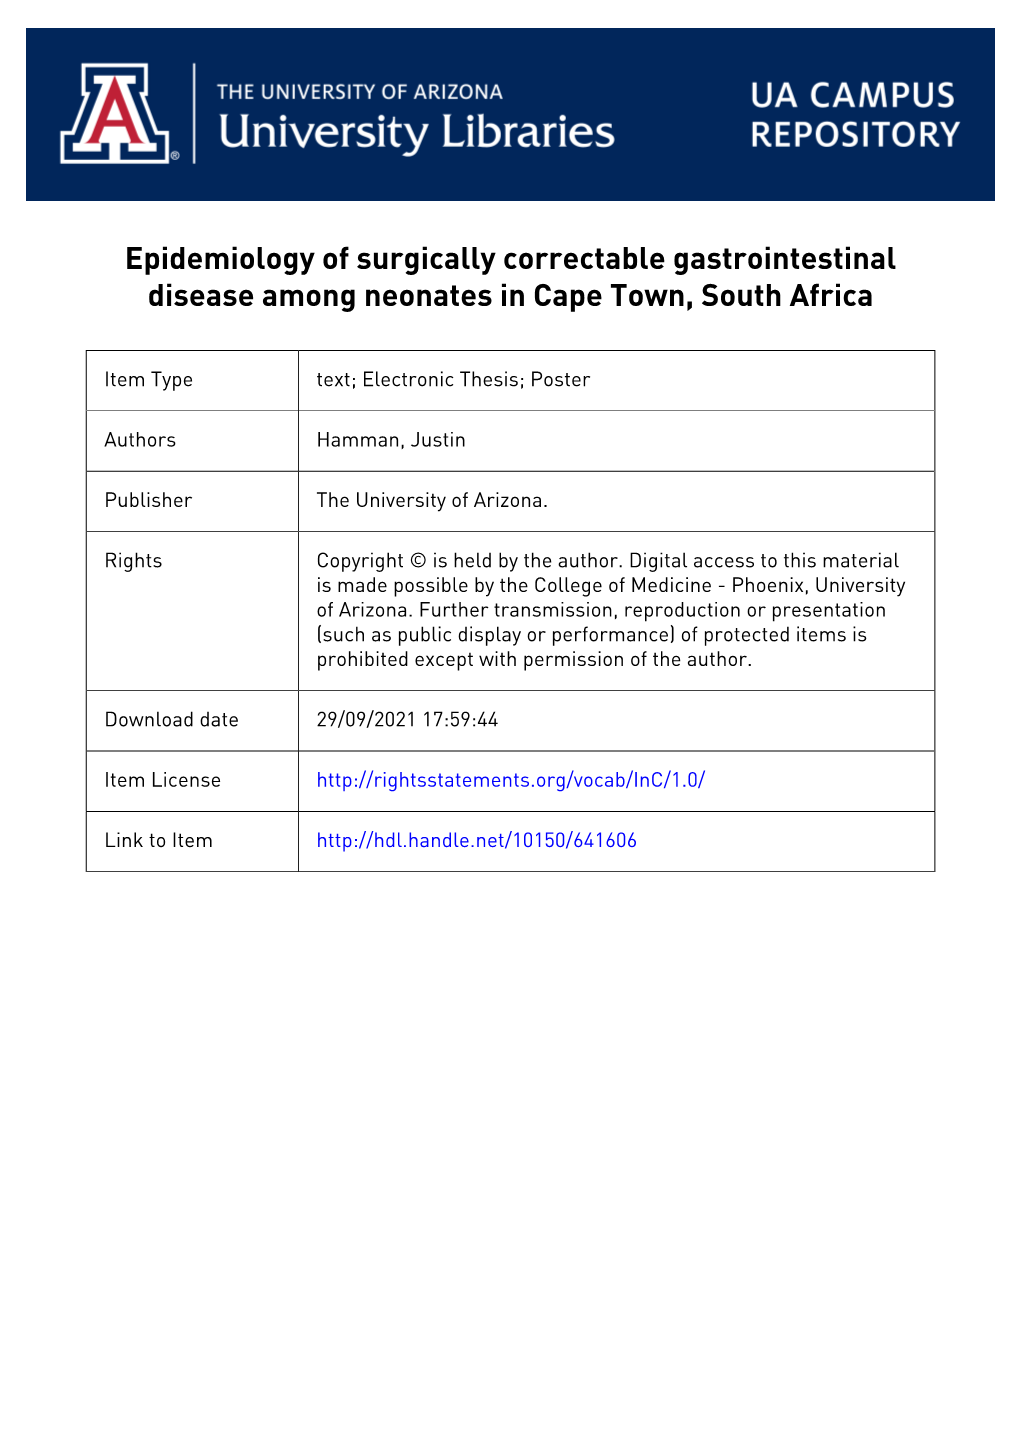 EPIDEMIOLOGY of SURGICALLY CORRECTABLE GASTROINTESTINAL DISEASE AMONG NEONATES in CAPE TOWN, SOUTH AFRICA a Thesis Submitted To